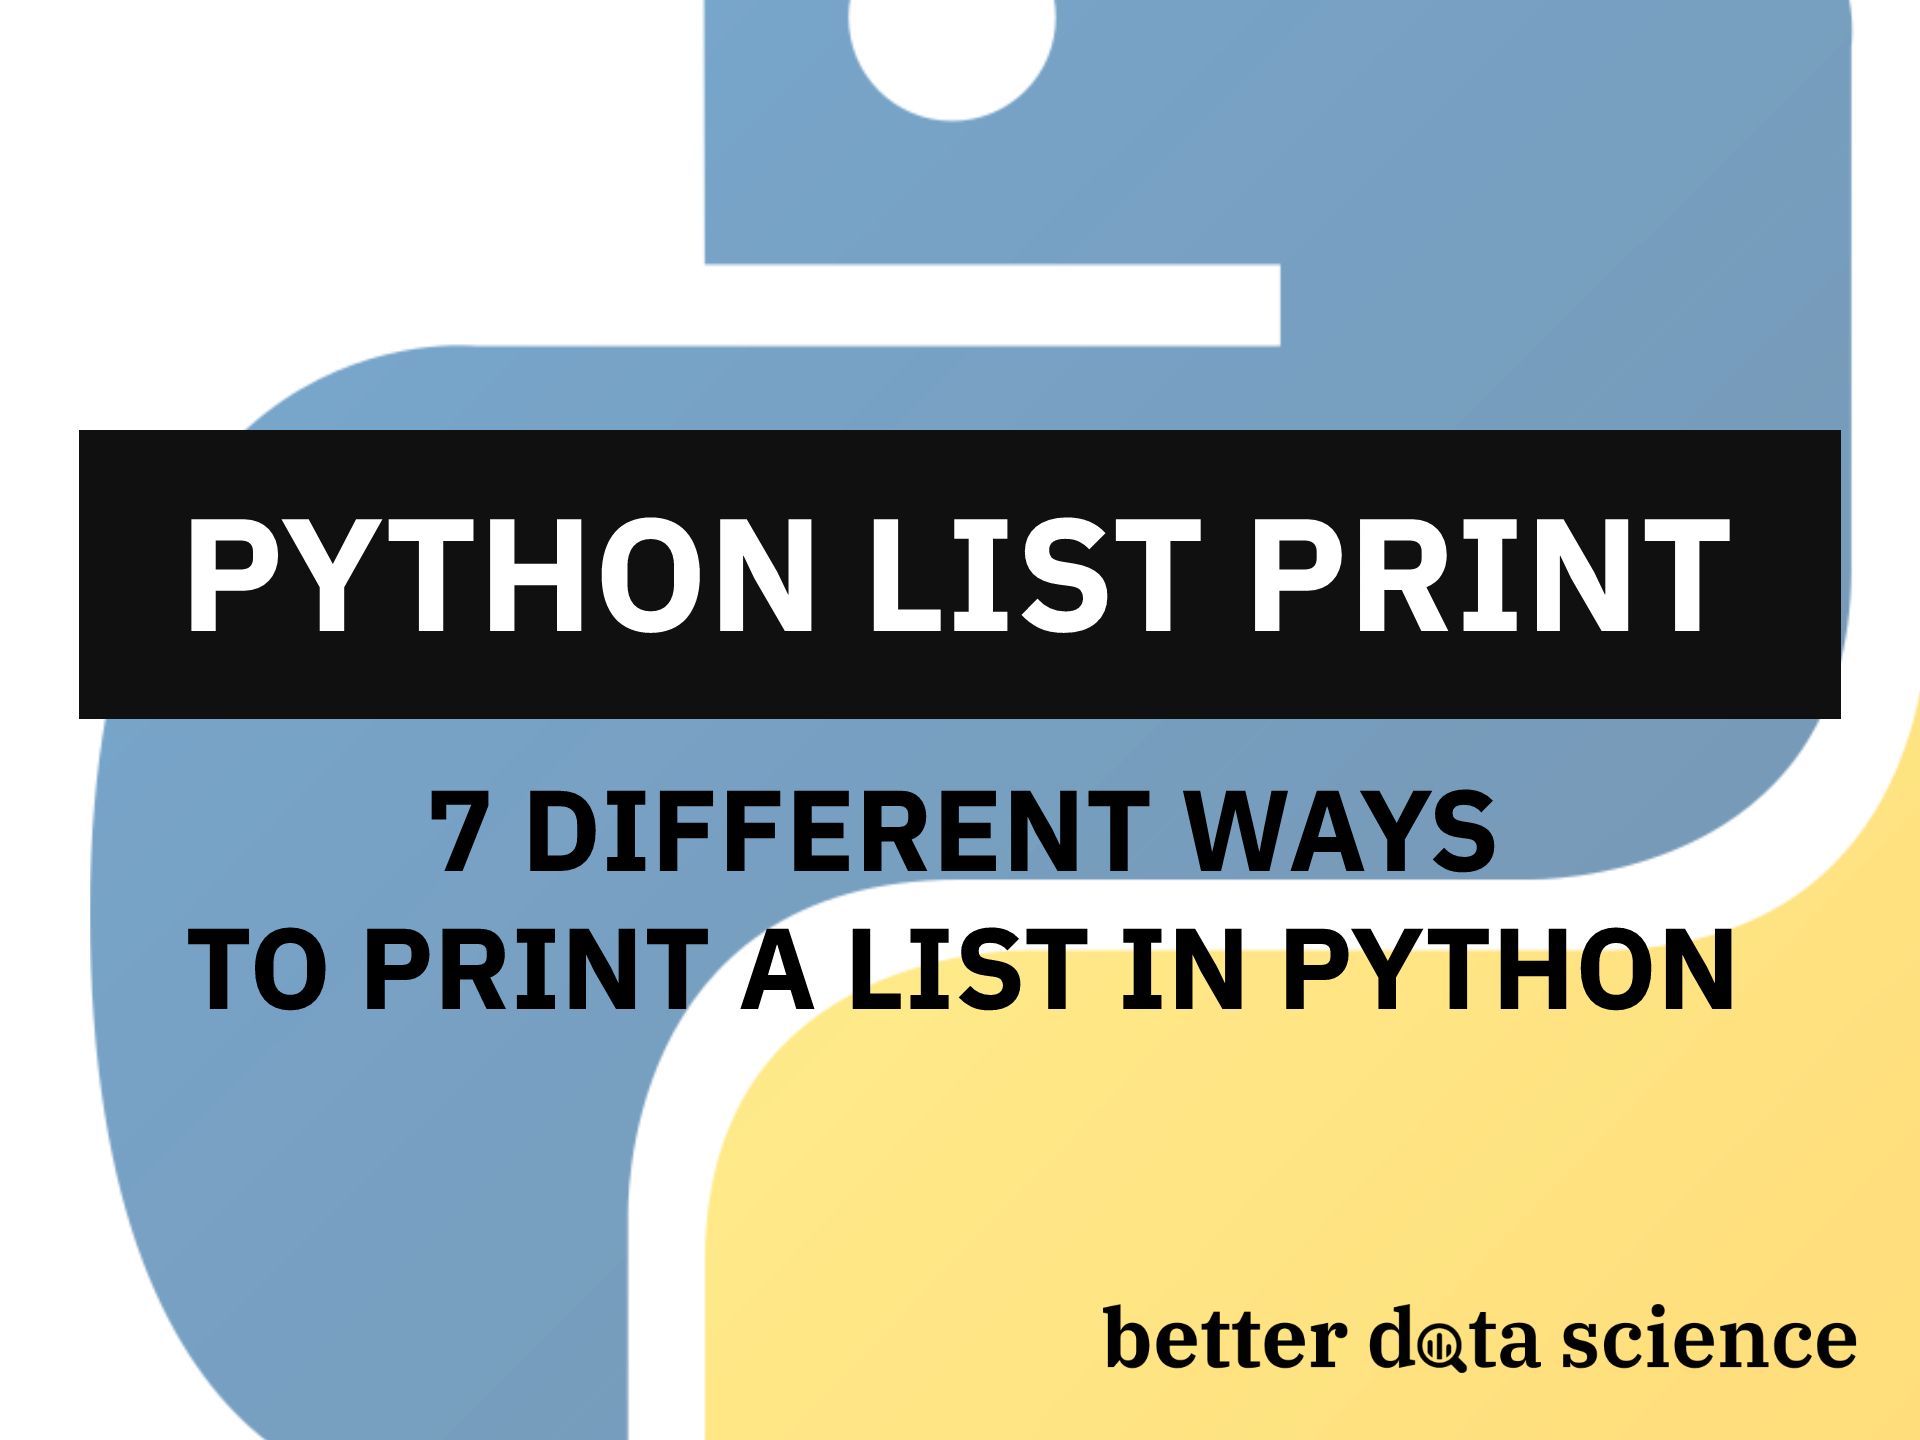 python-list-print-7-different-ways-to-print-a-list-you-must-know